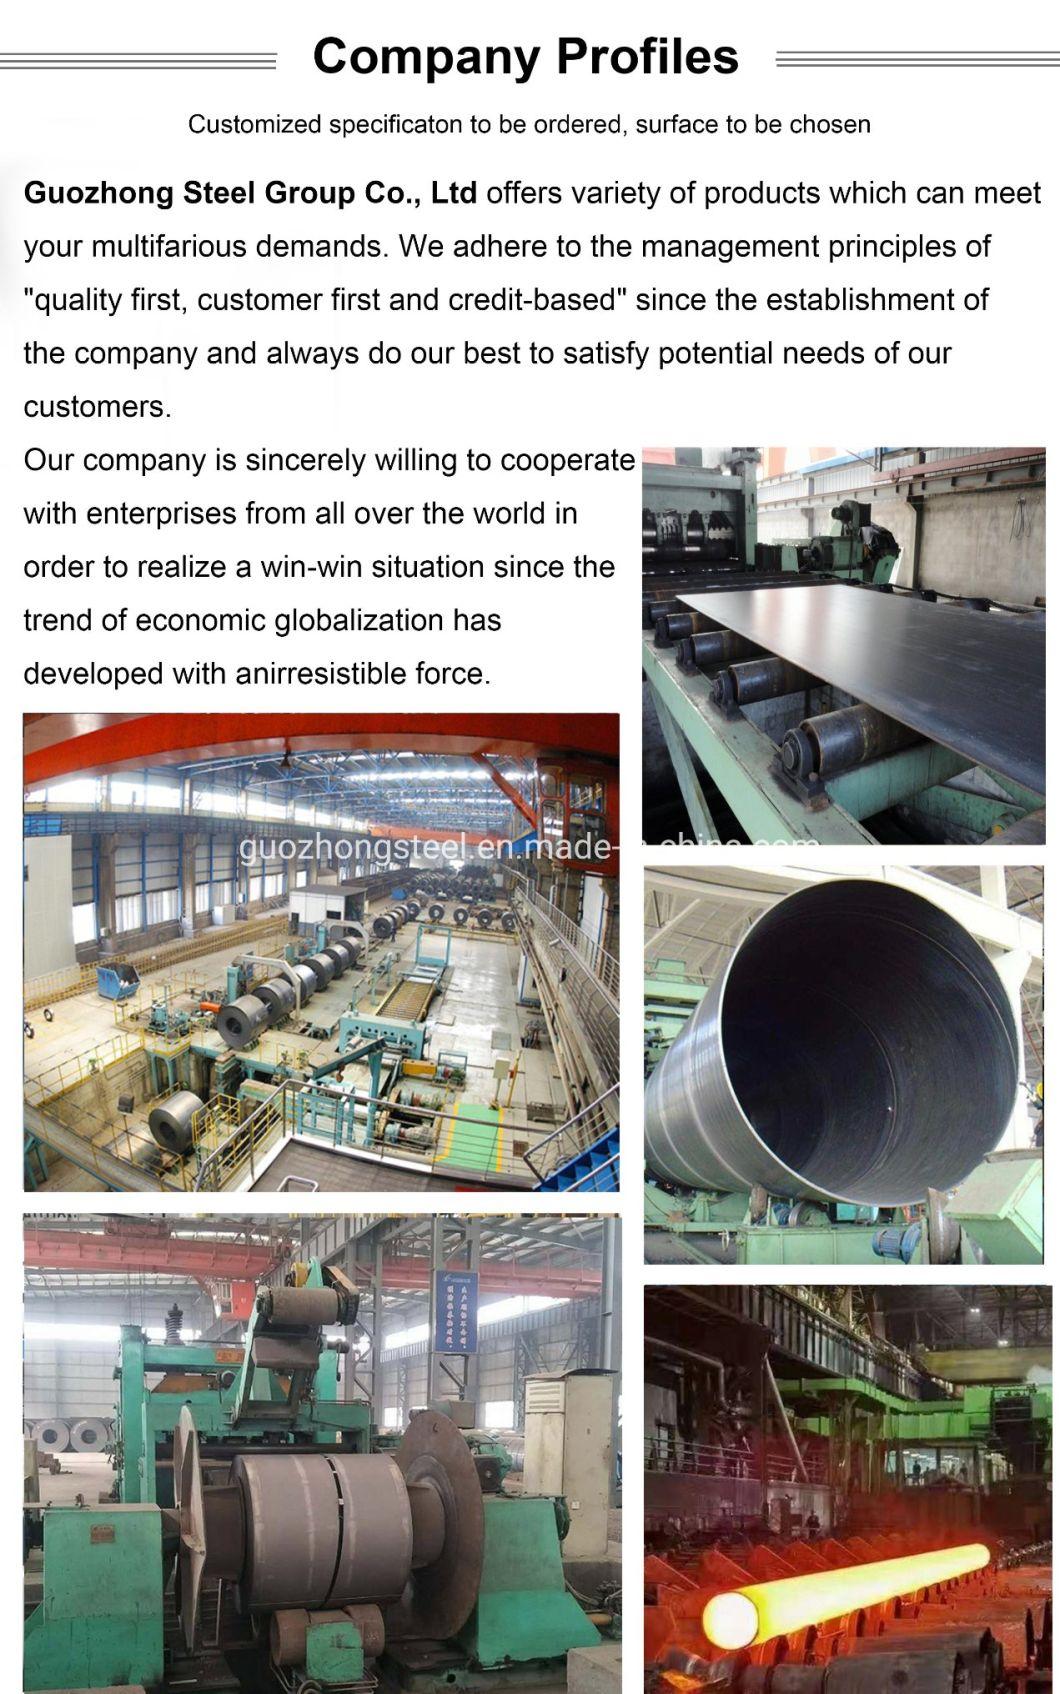 2mm Ss400, S235jr Galvanized Steel Pipe for Sale